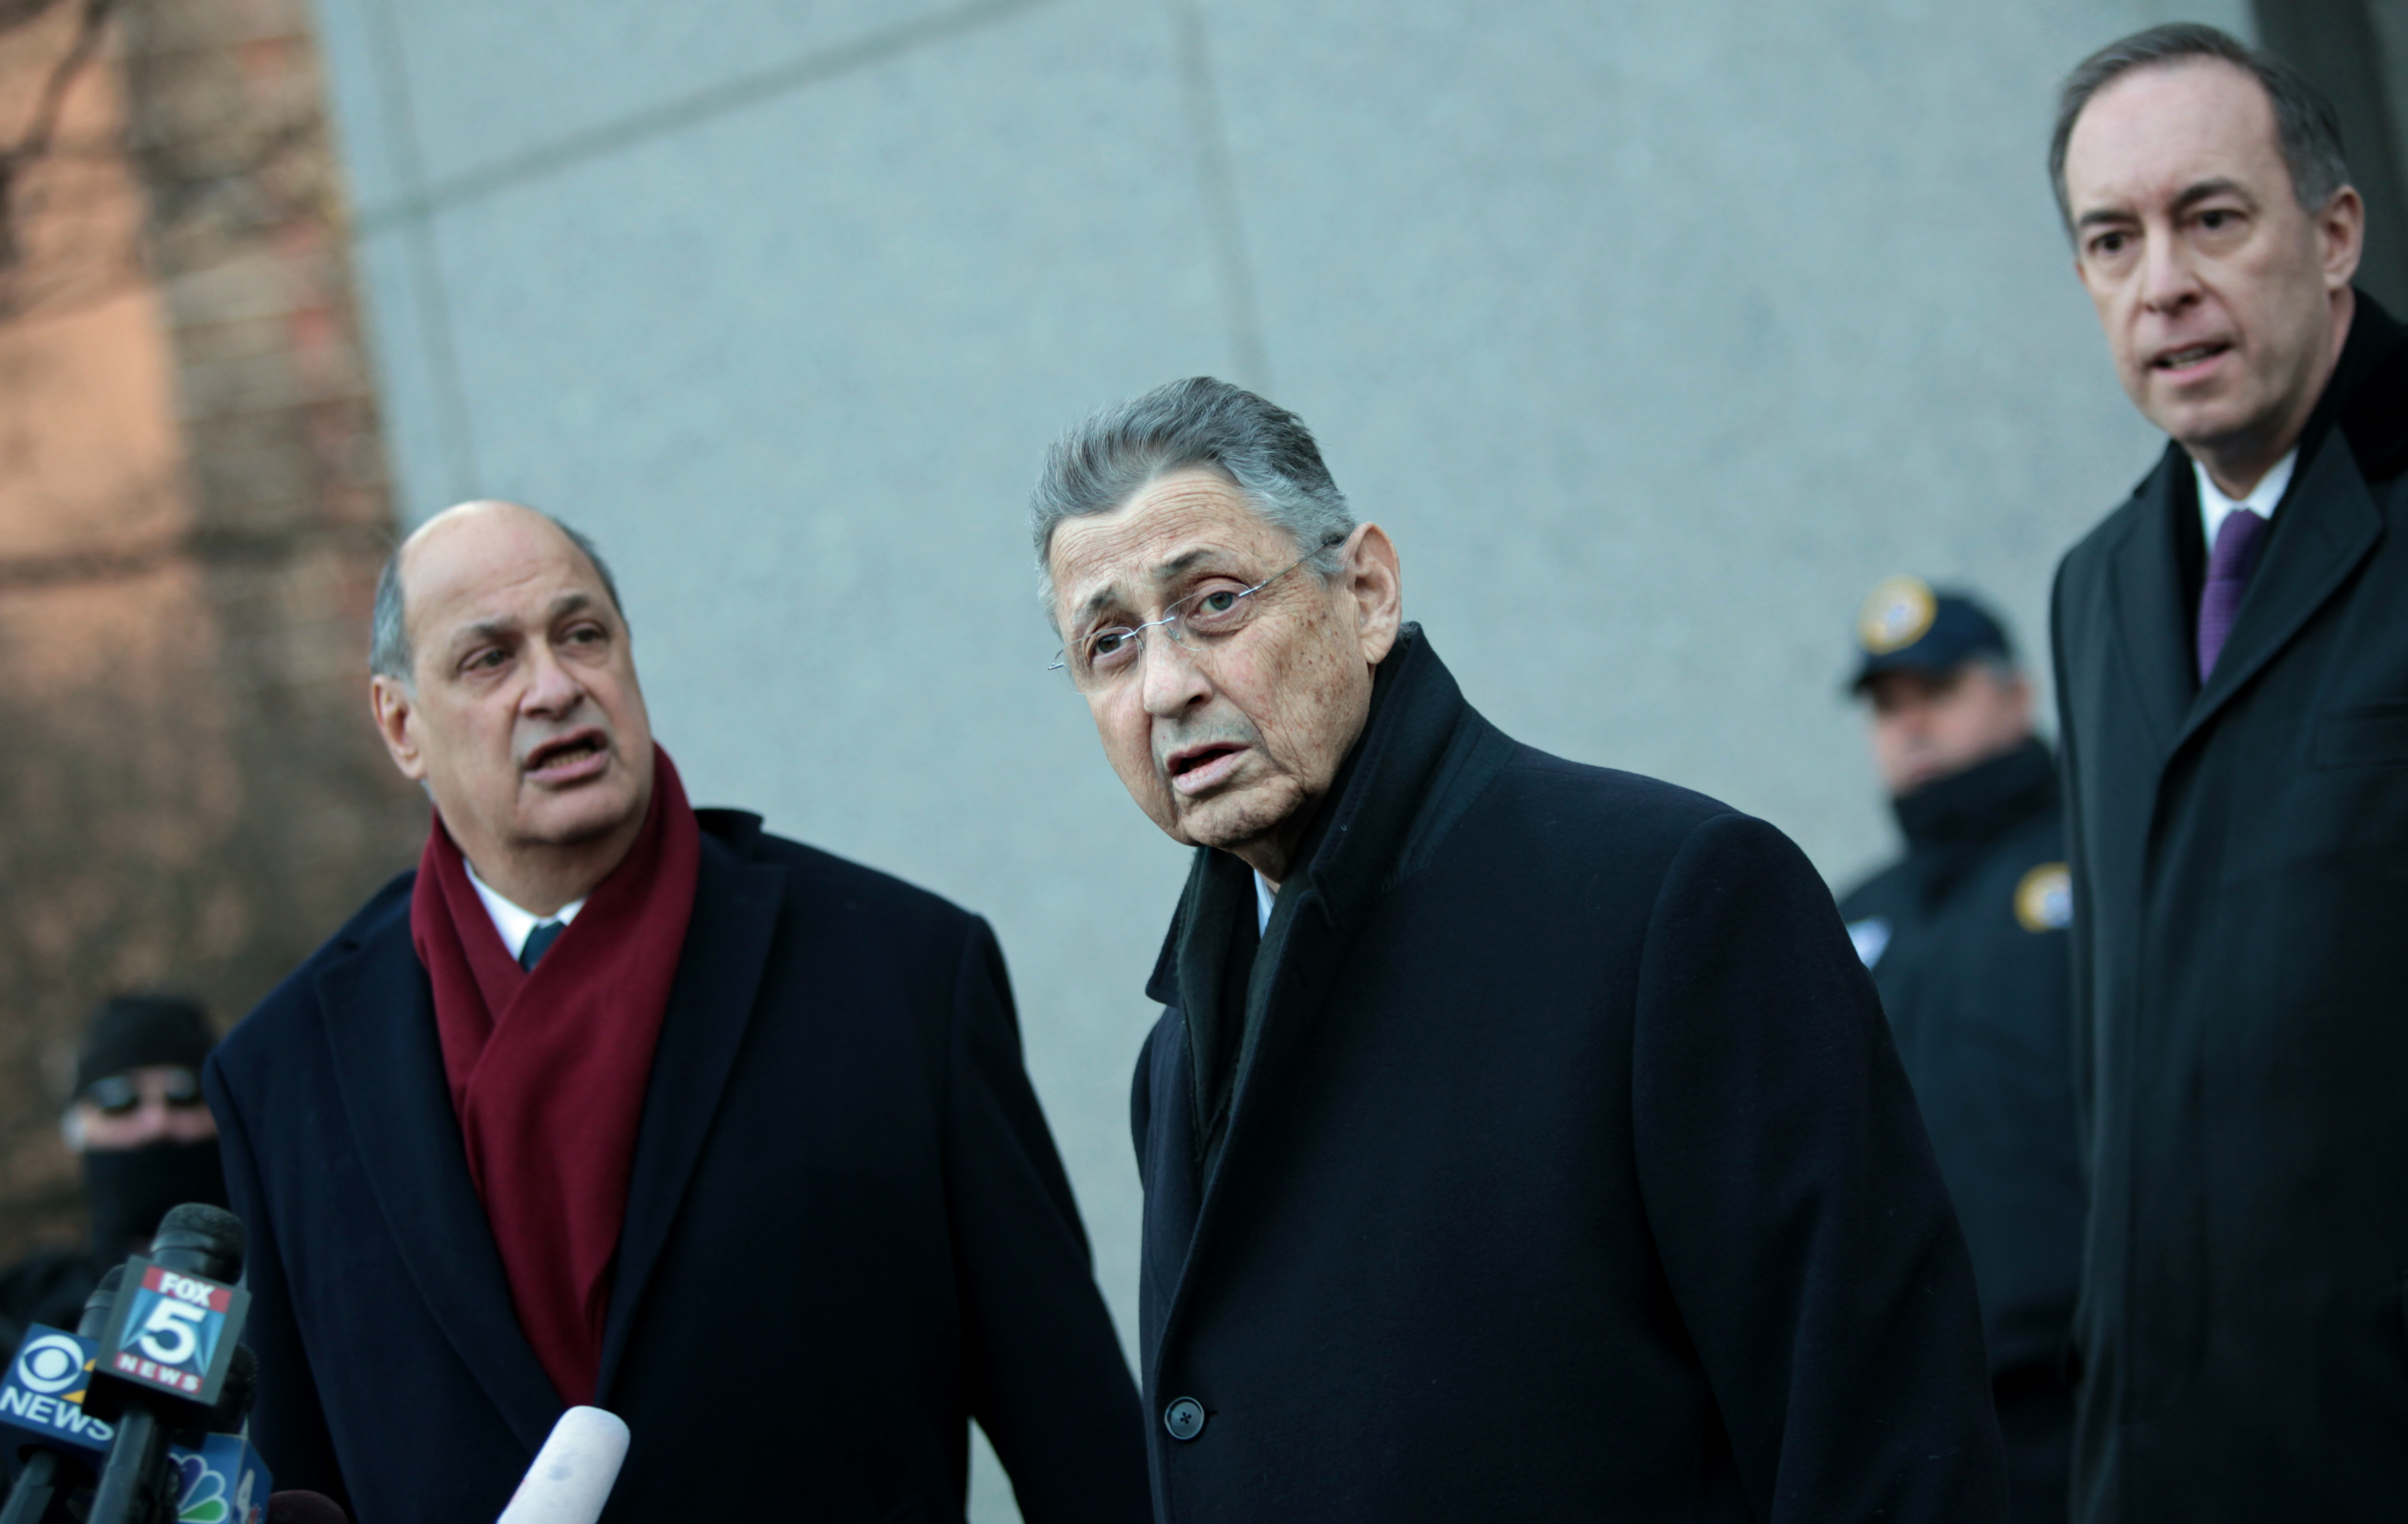 New York State Assembly Speaker Sheldon Silver walks out of the Federal Courthouse with his lawyers on January 22. (Photo by Yana Paskova/Getty Images)